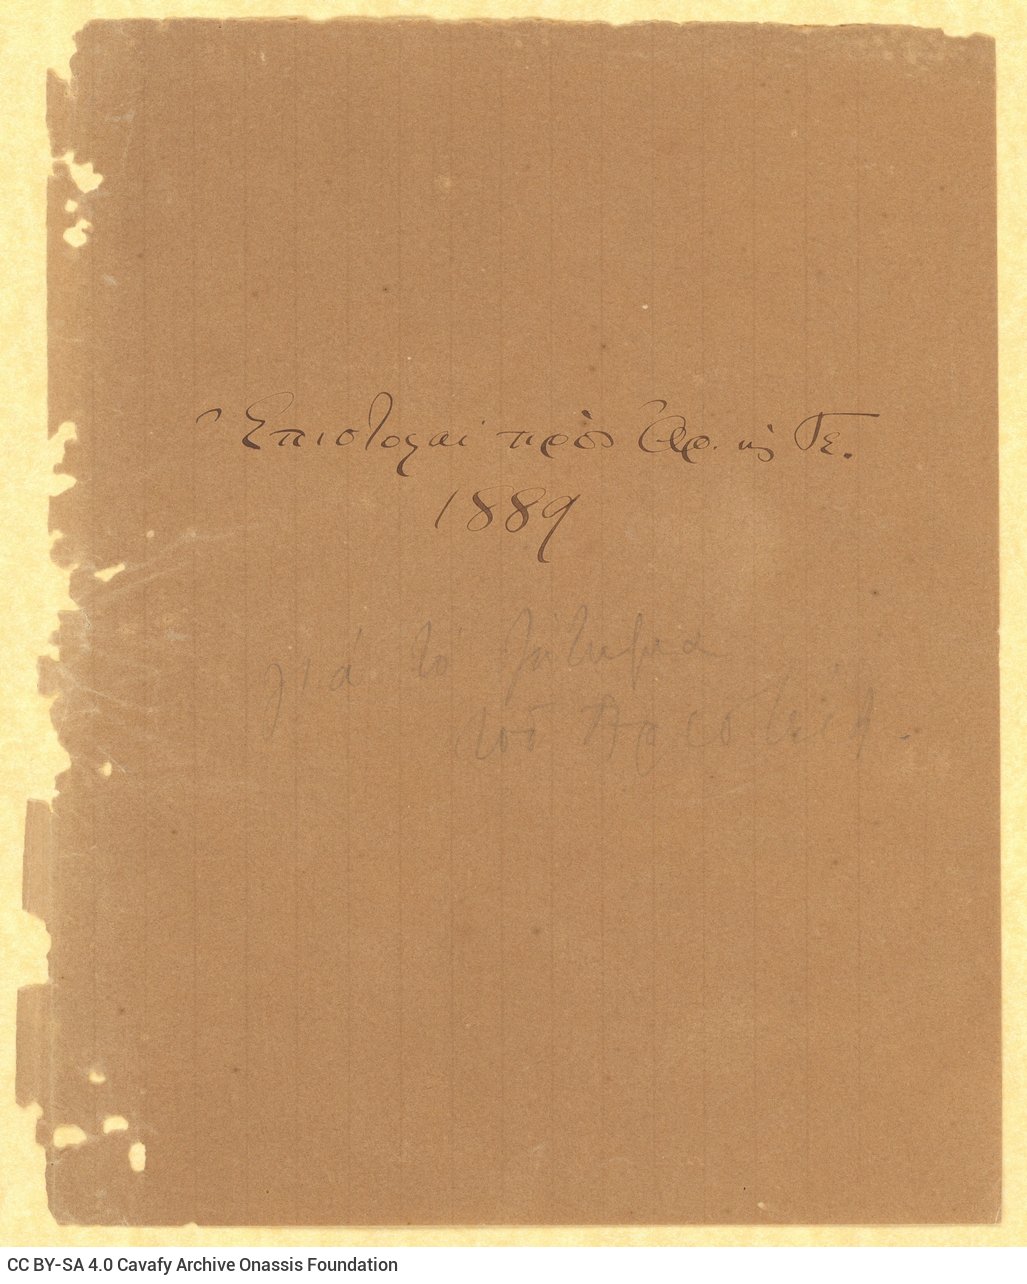 Handwritten note on part of a sheet of paper regarding the contents of the entire folder (which includes several draft letter